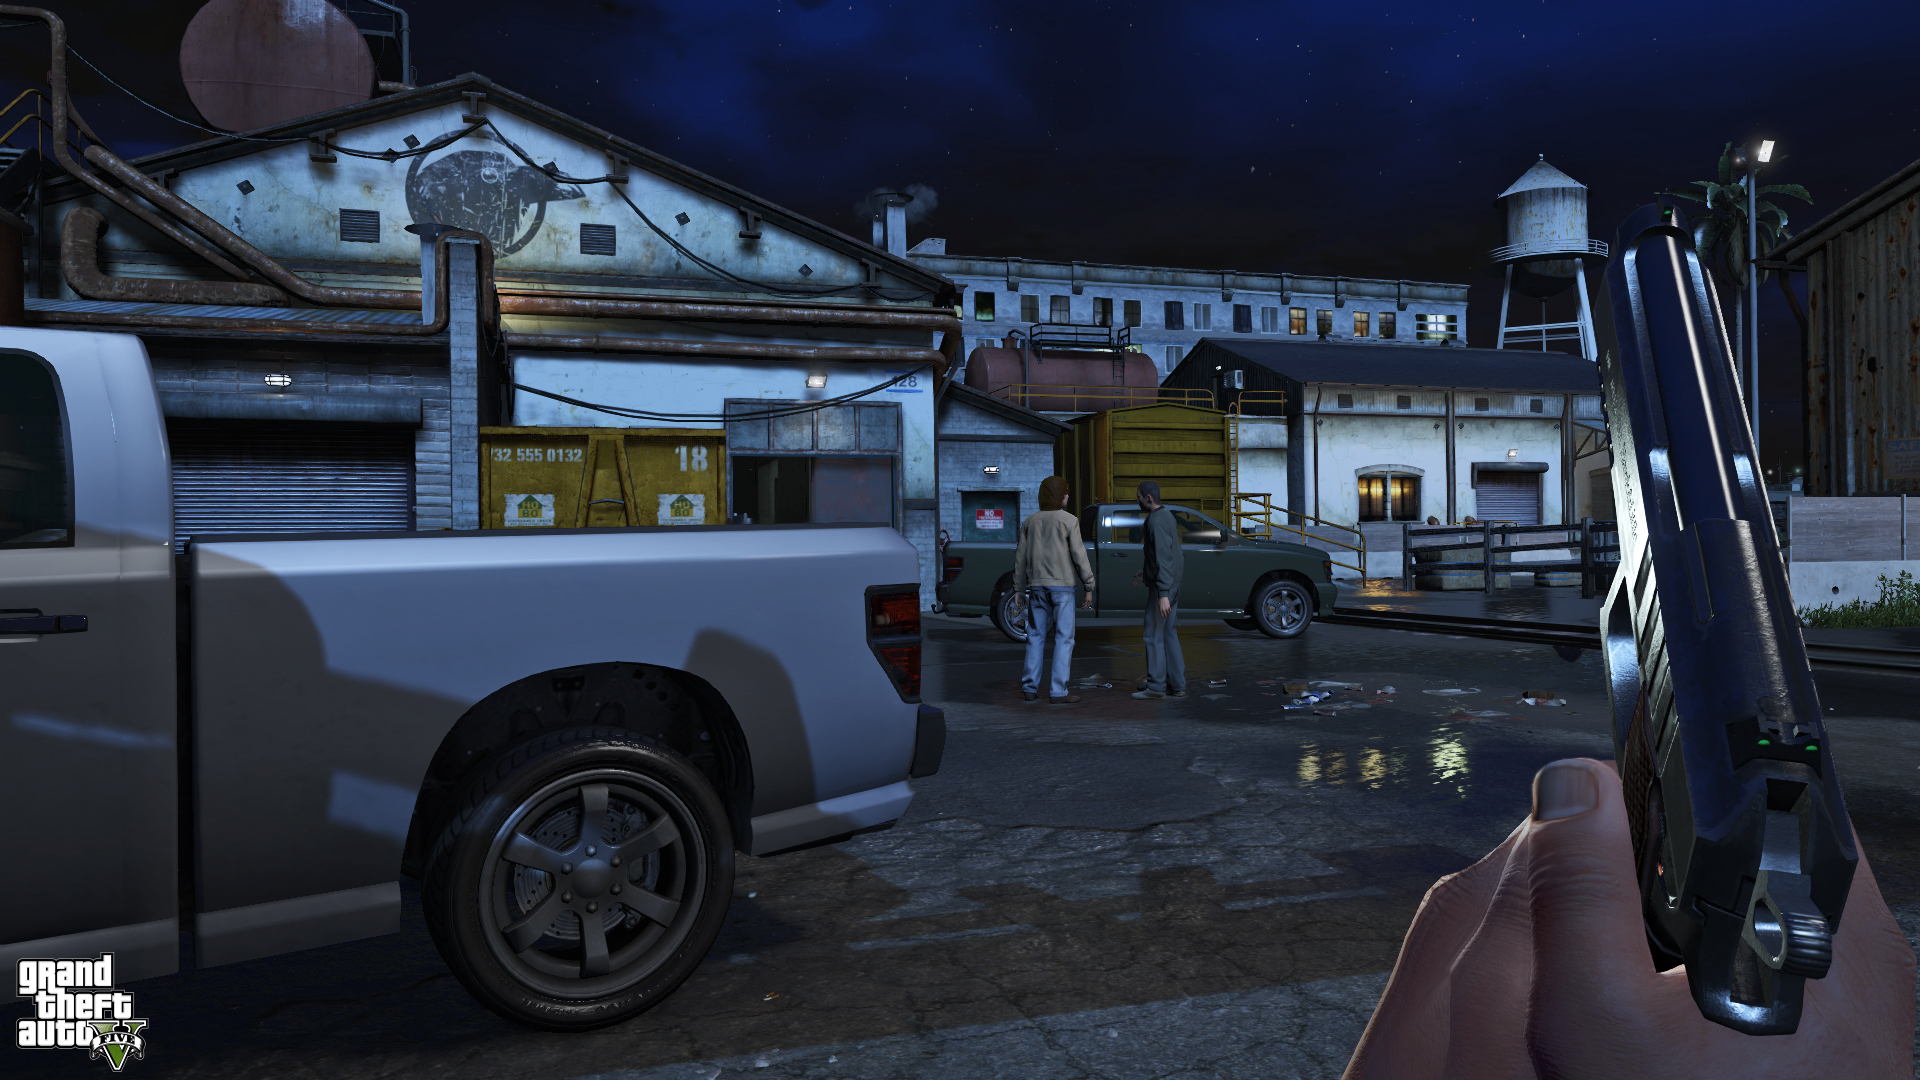 Grand Theft Auto V (for Xbox One) Review